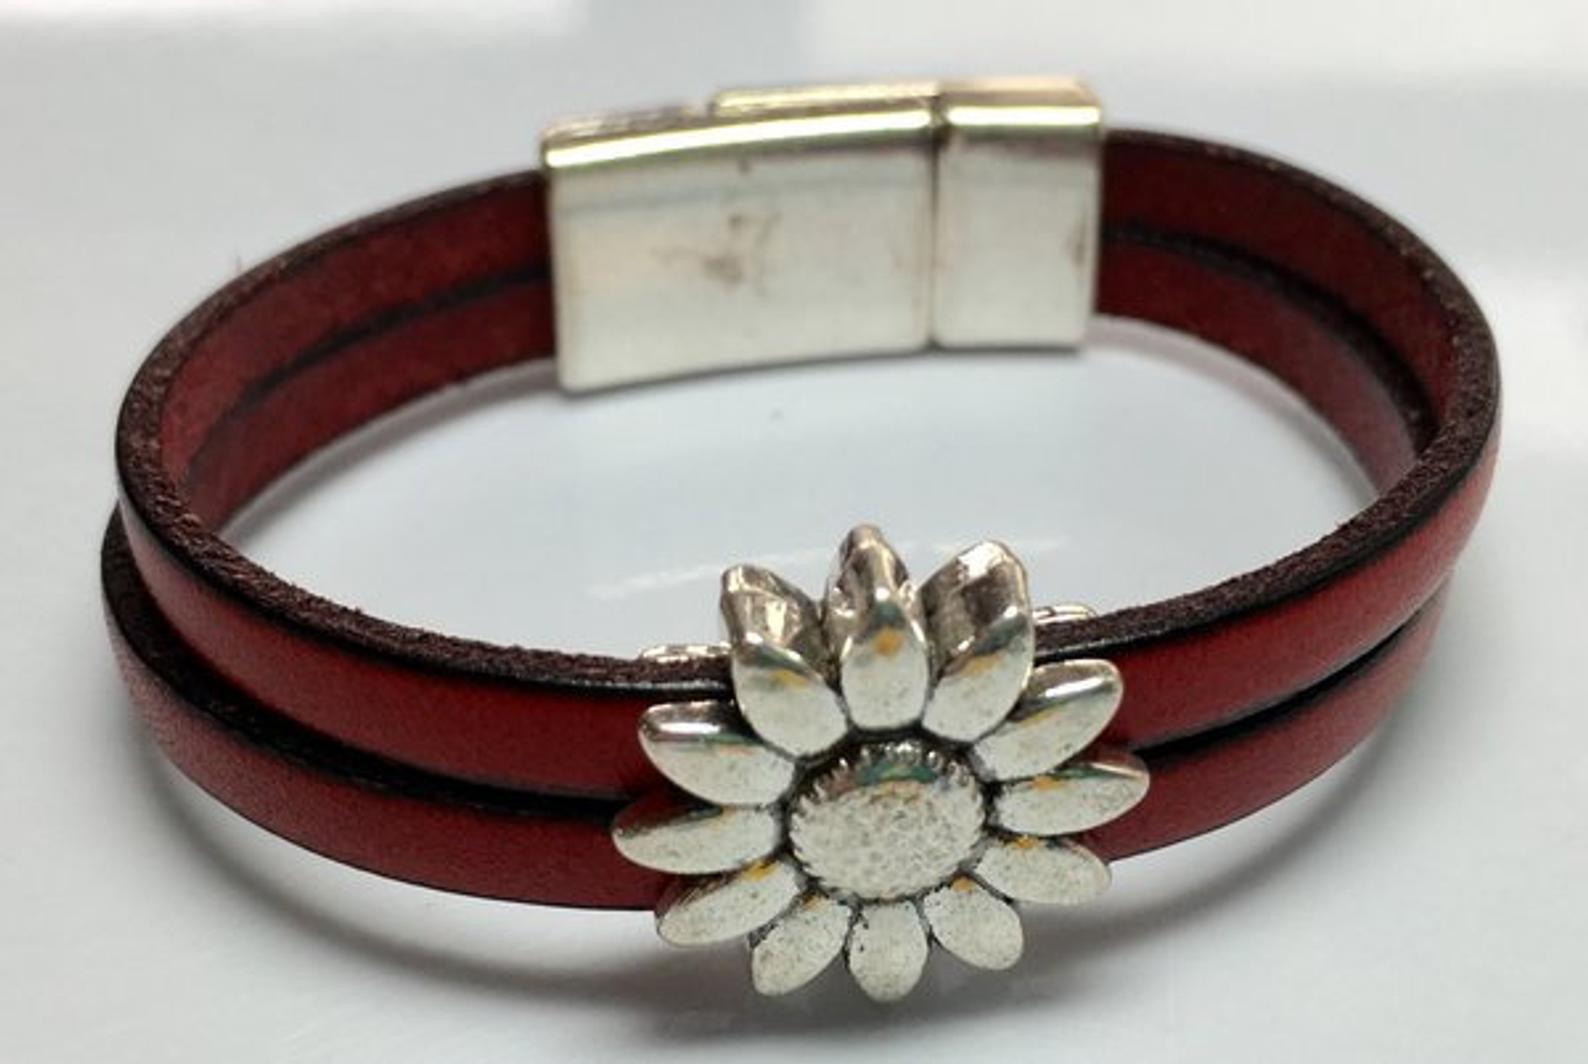 12 mm wide Details about  / Double Python Leather Bracelet with Magnetic Clasp